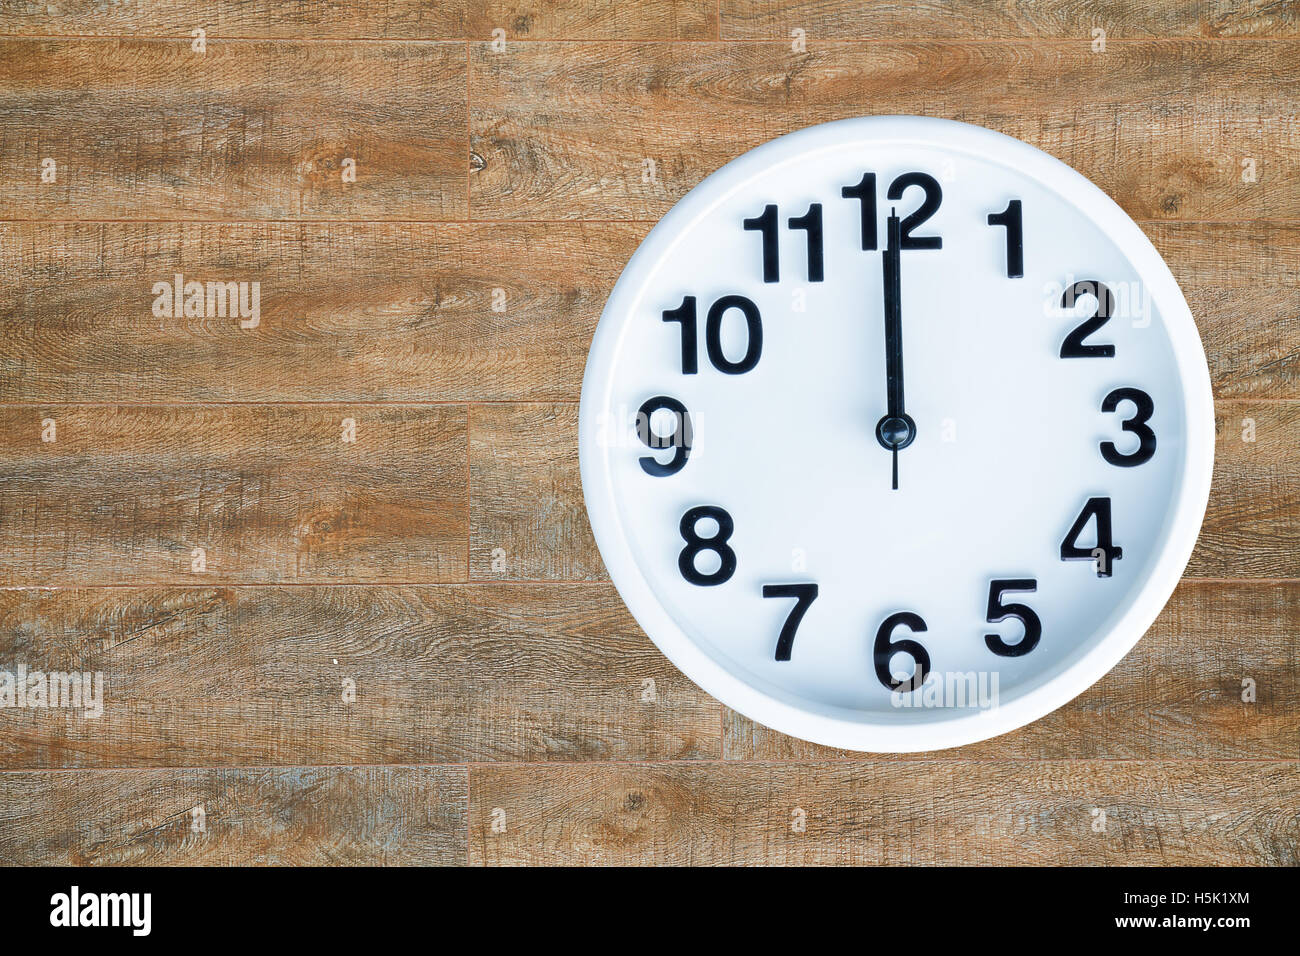 12pm clock Cut Out Stock Images & Pictures - Alamy